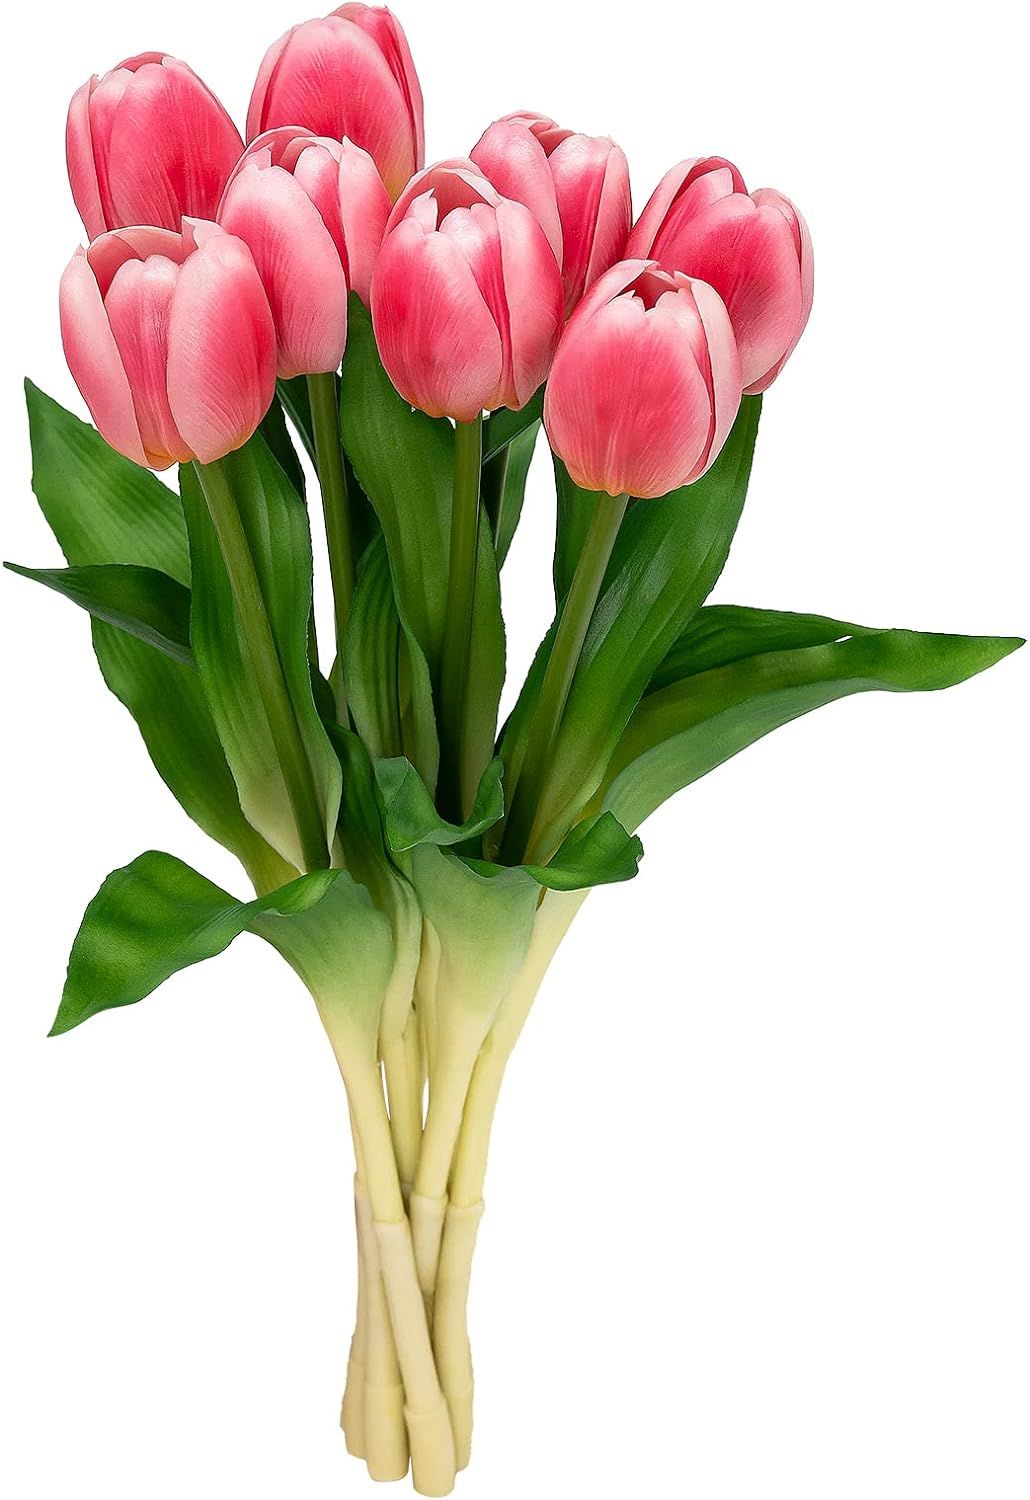 Softflame Artificial/Fake/Faux Flowers - Tulip Pink 8PCS for Wedding, Home, Party, Restaurant | Amazon (US)